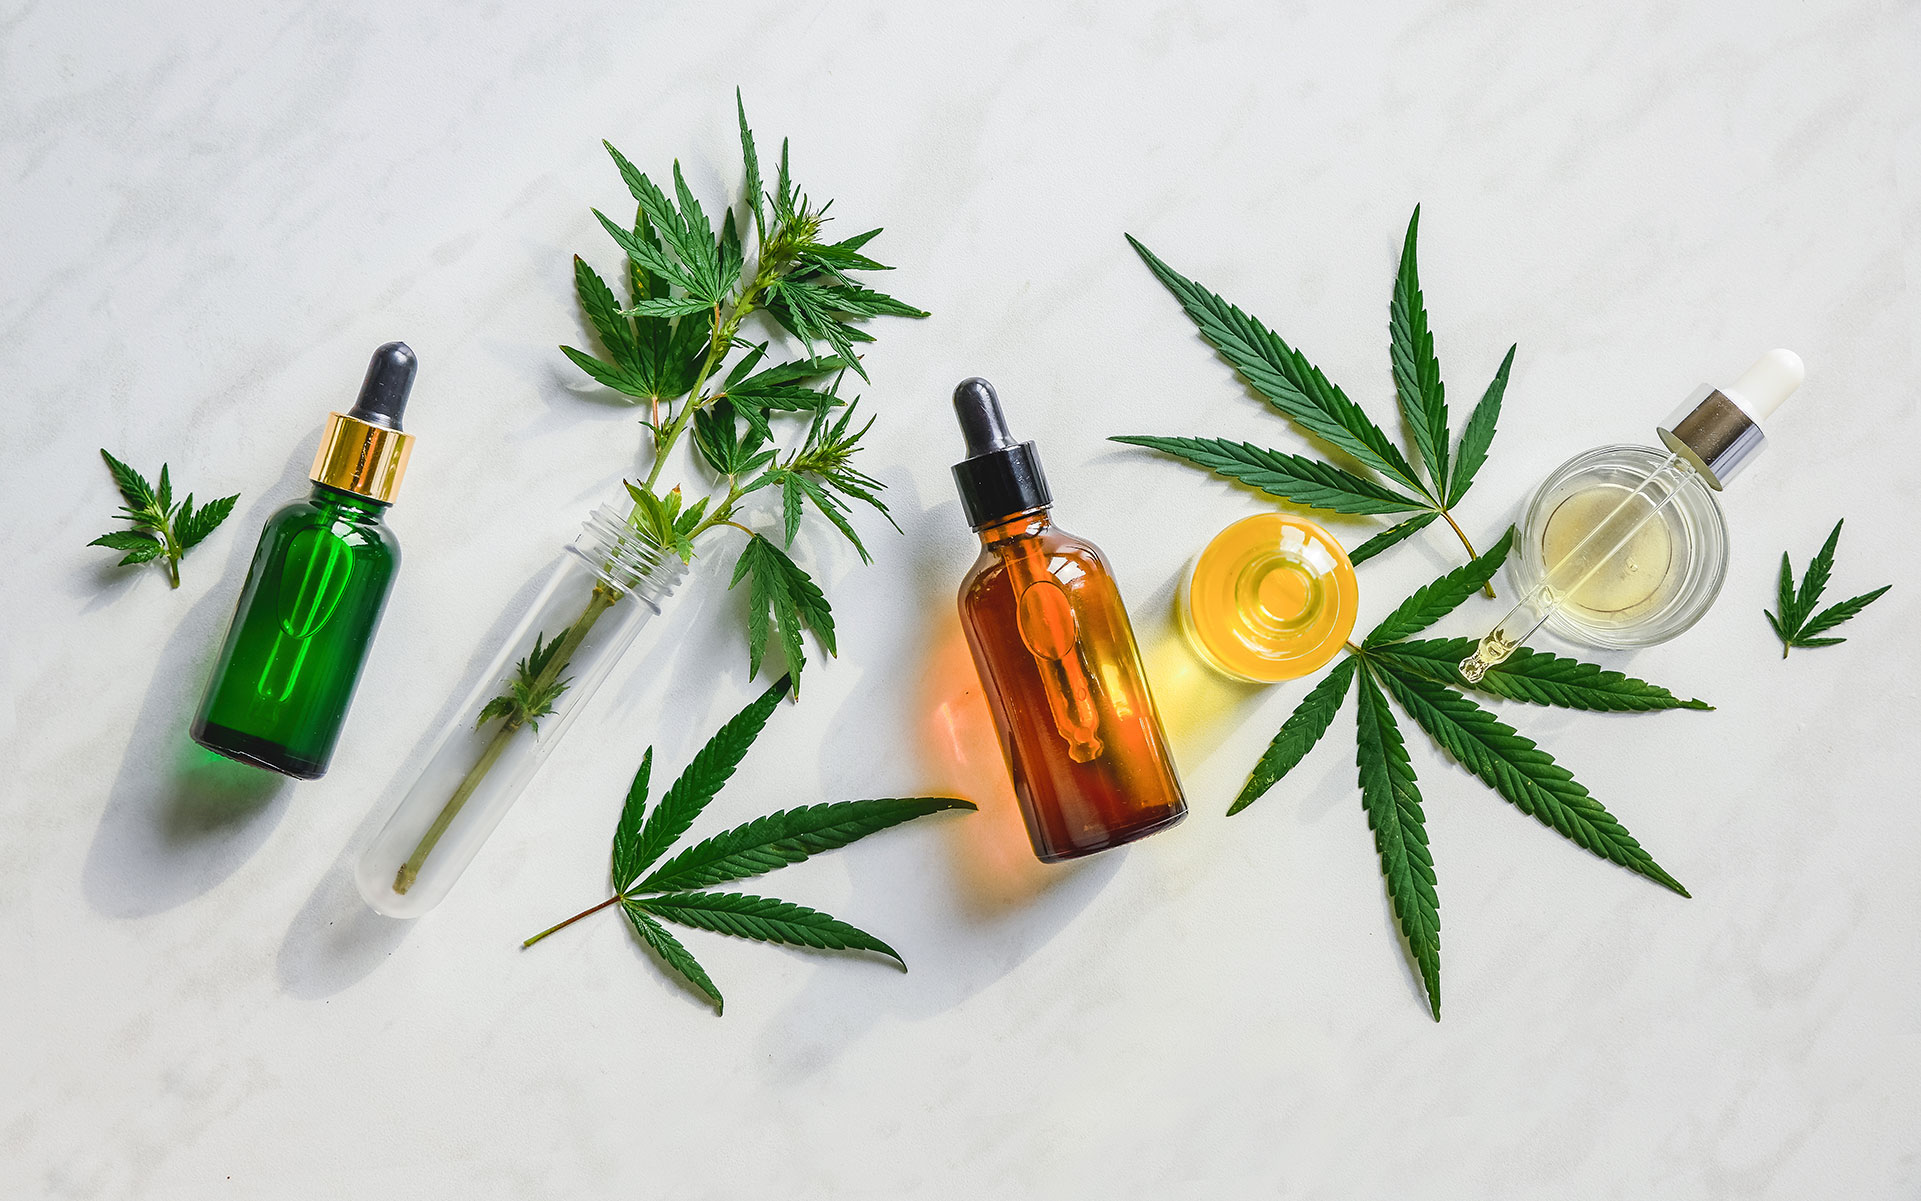 Where Can You Buy Cbd Oil Near Me 63052 - Cbd|Oil|Cannabidiol|Products|View|Abstract|Effects|Hemp|Cannabis|Product|Thc|Pain|People|Health|Body|Plant|Cannabinoids|Medications|Oils|Drug|Benefits|System|Study|Marijuana|Anxiety|Side|Research|Effect|Liver|Quality|Treatment|Studies|Epilepsy|Symptoms|Gummies|Compounds|Dose|Time|Inflammation|Bottle|Cbd Oil|View Abstract|Side Effects|Cbd Products|Endocannabinoid System|Multiple Sclerosis|Cbd Oils|Cbd Gummies|Cannabis Plant|Hemp Oil|Cbd Product|Hemp Plant|United States|Cytochrome P450|Many People|Chronic Pain|Nuleaf Naturals|Royal Cbd|Full-Spectrum Cbd Oil|Drug Administration|Cbd Oil Products|Medical Marijuana|Drug Test|Heavy Metals|Clinical Trial|Clinical Trials|Cbd Oil Side|Rating Highlights|Wide Variety|Animal Studies